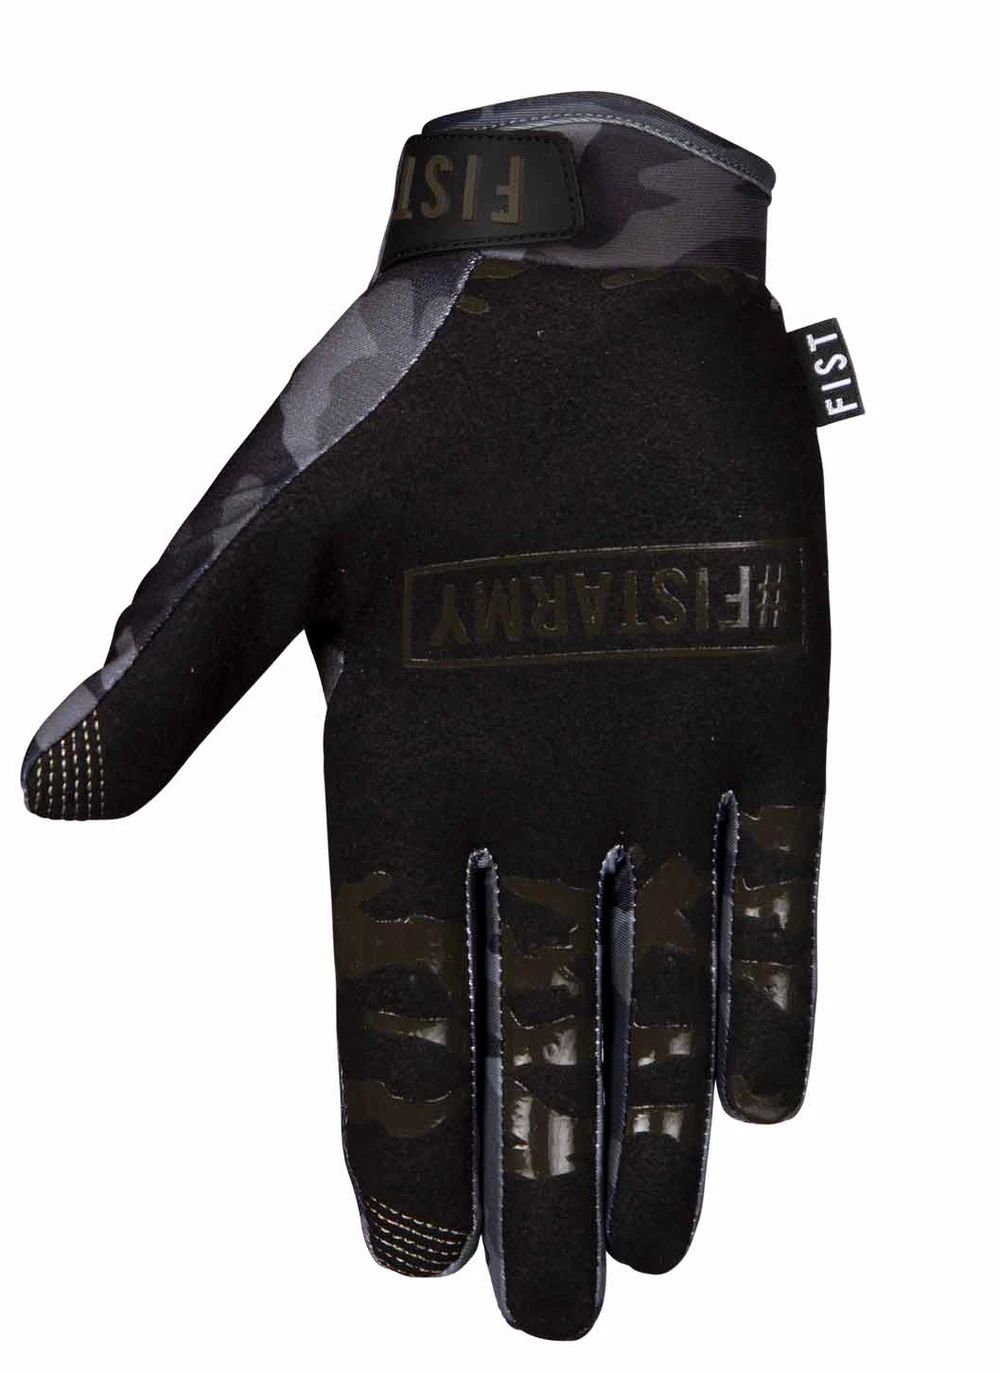 FIST GLOVES "COVERT CAMO" YOUTH  XS, S, M or L Black/Grey